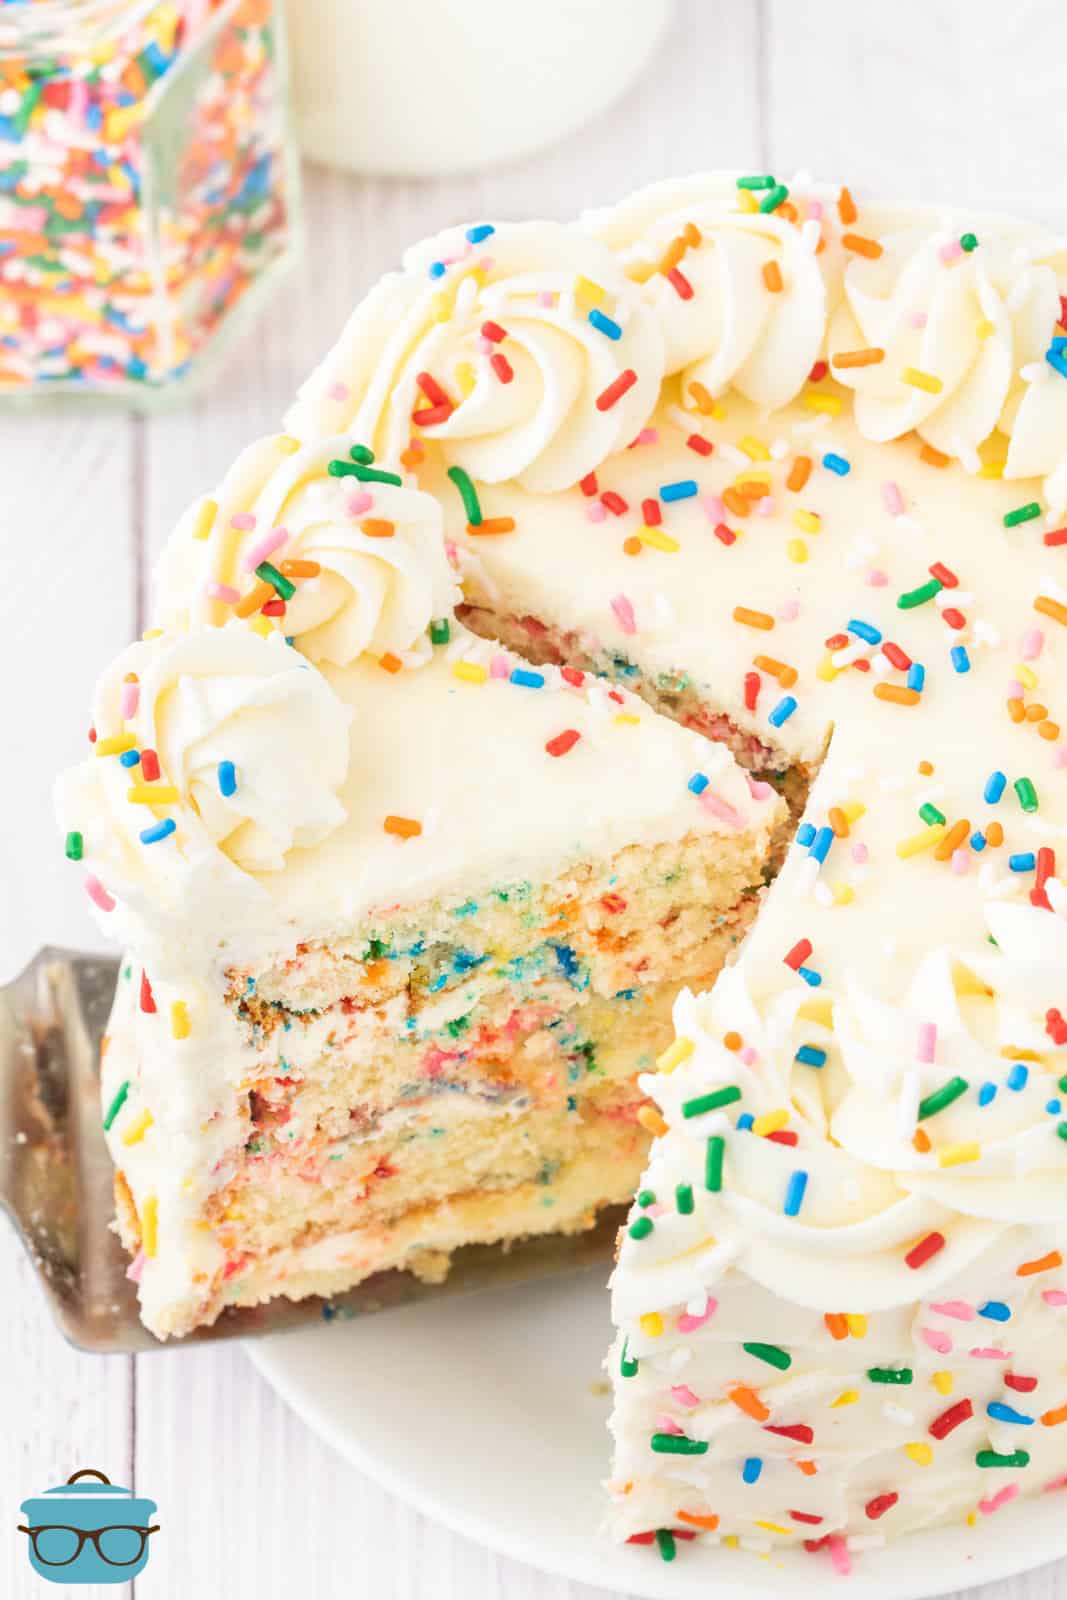 A Funfetti Cake that is layered with a slice being cut out.